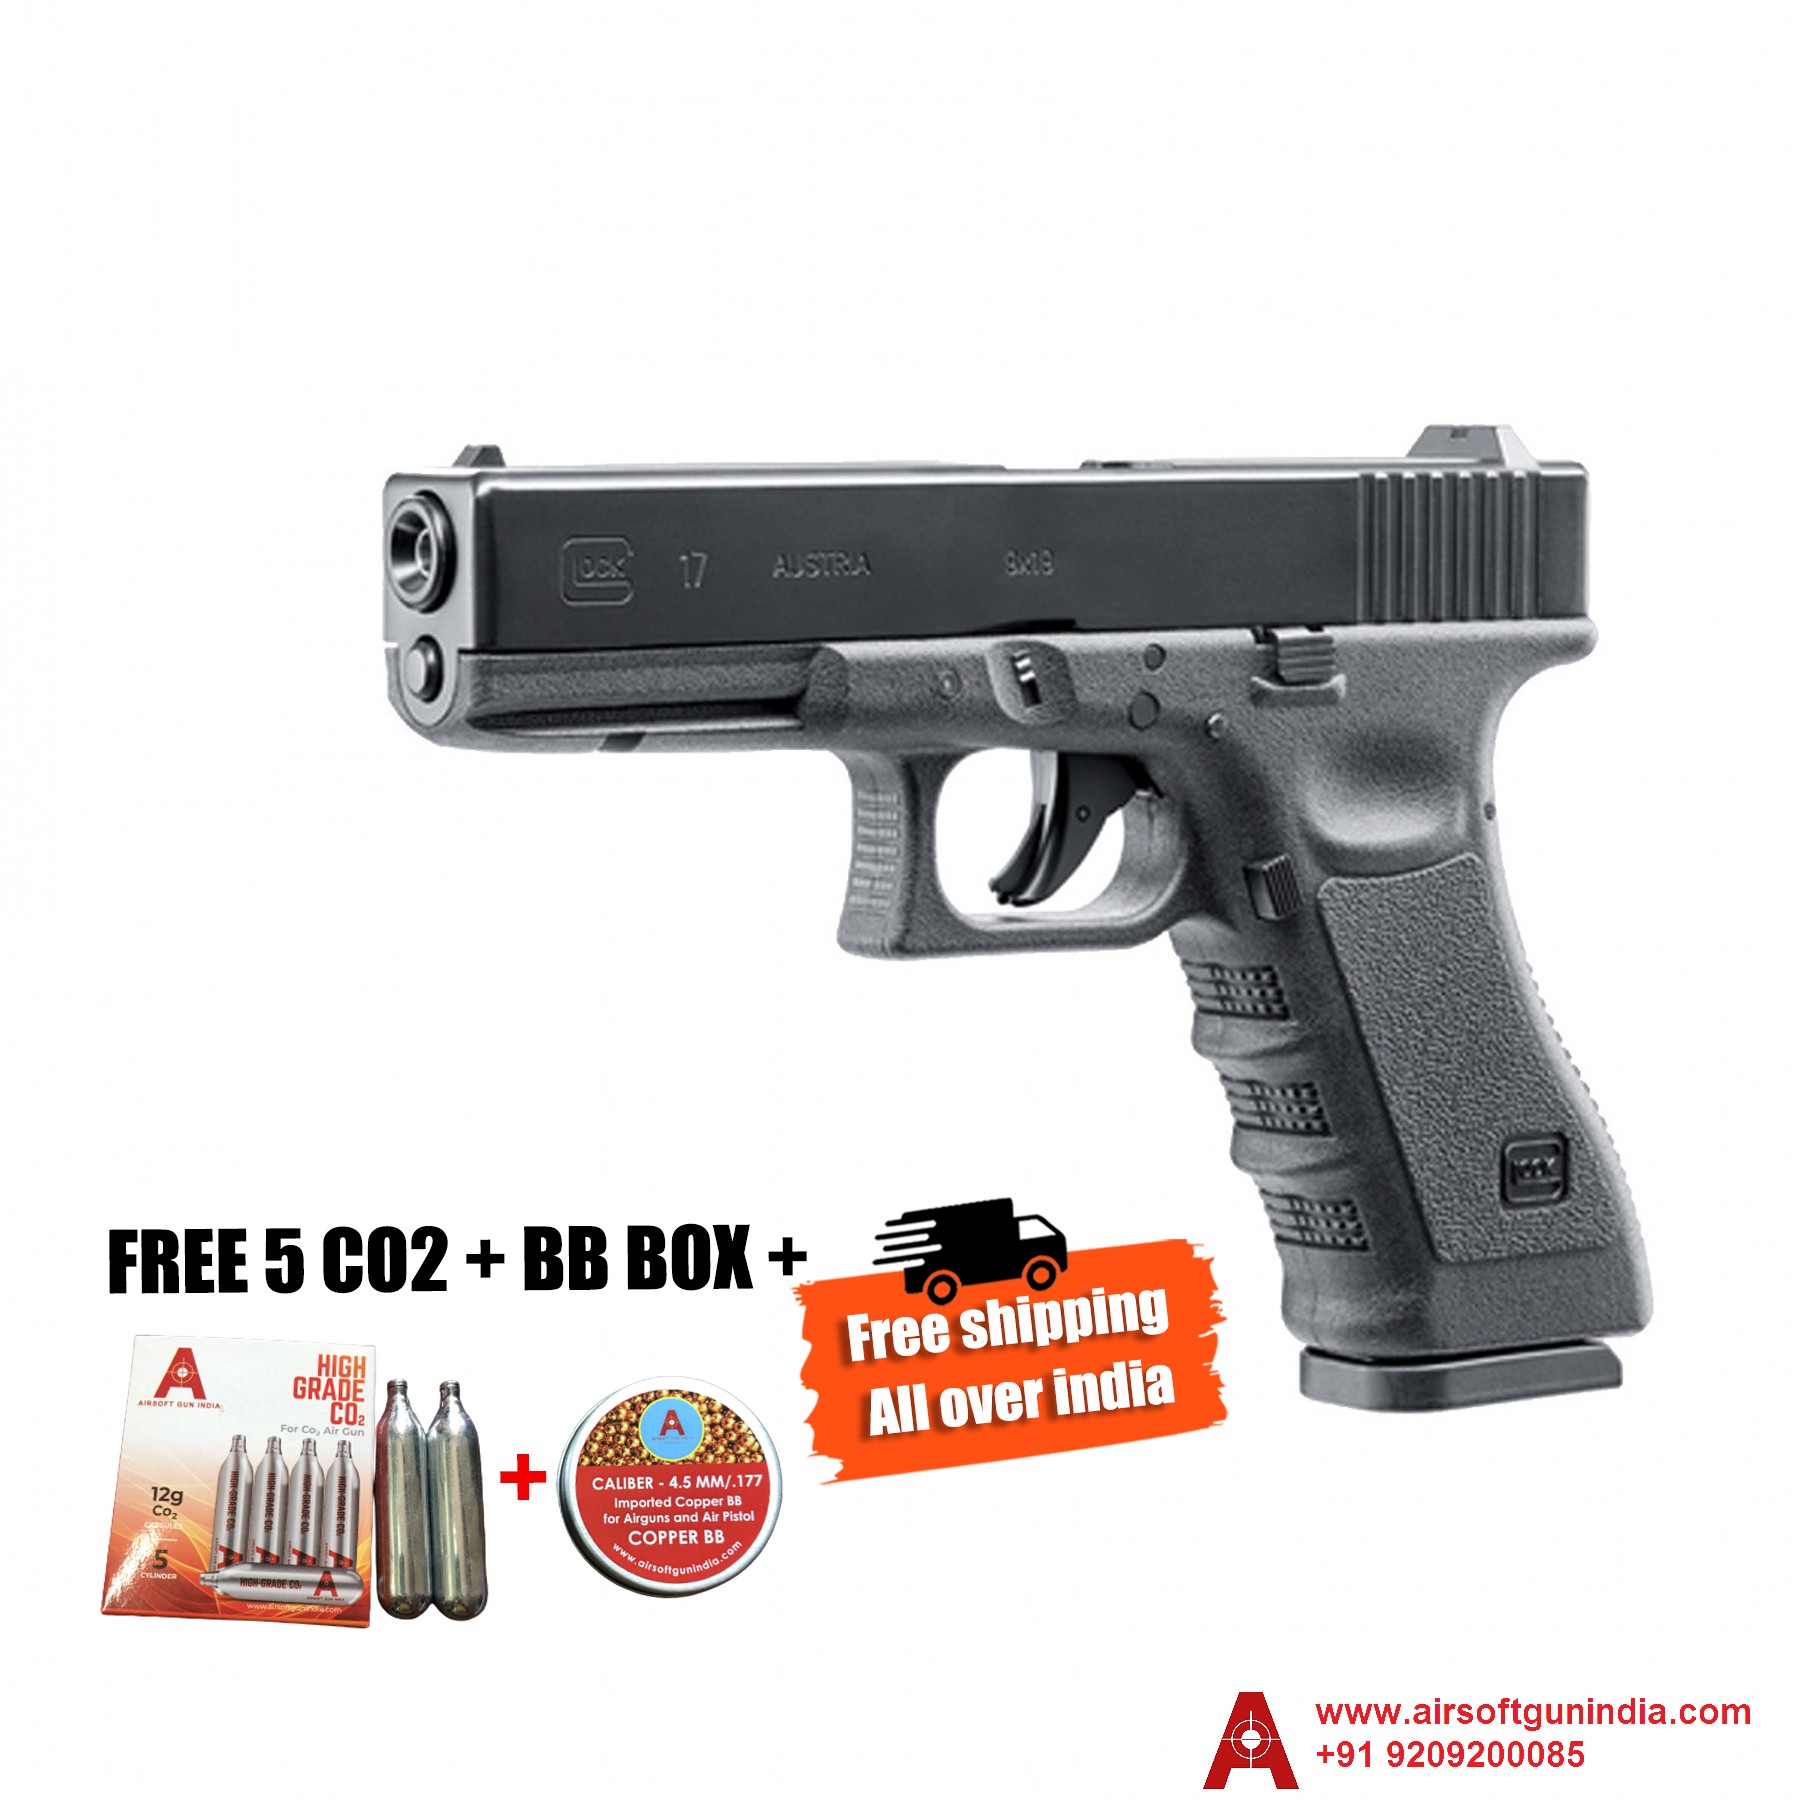 Glock 17 Gen3 Cal .177 CO2 Bb And Pellet Pistol By Airsoft Gun India